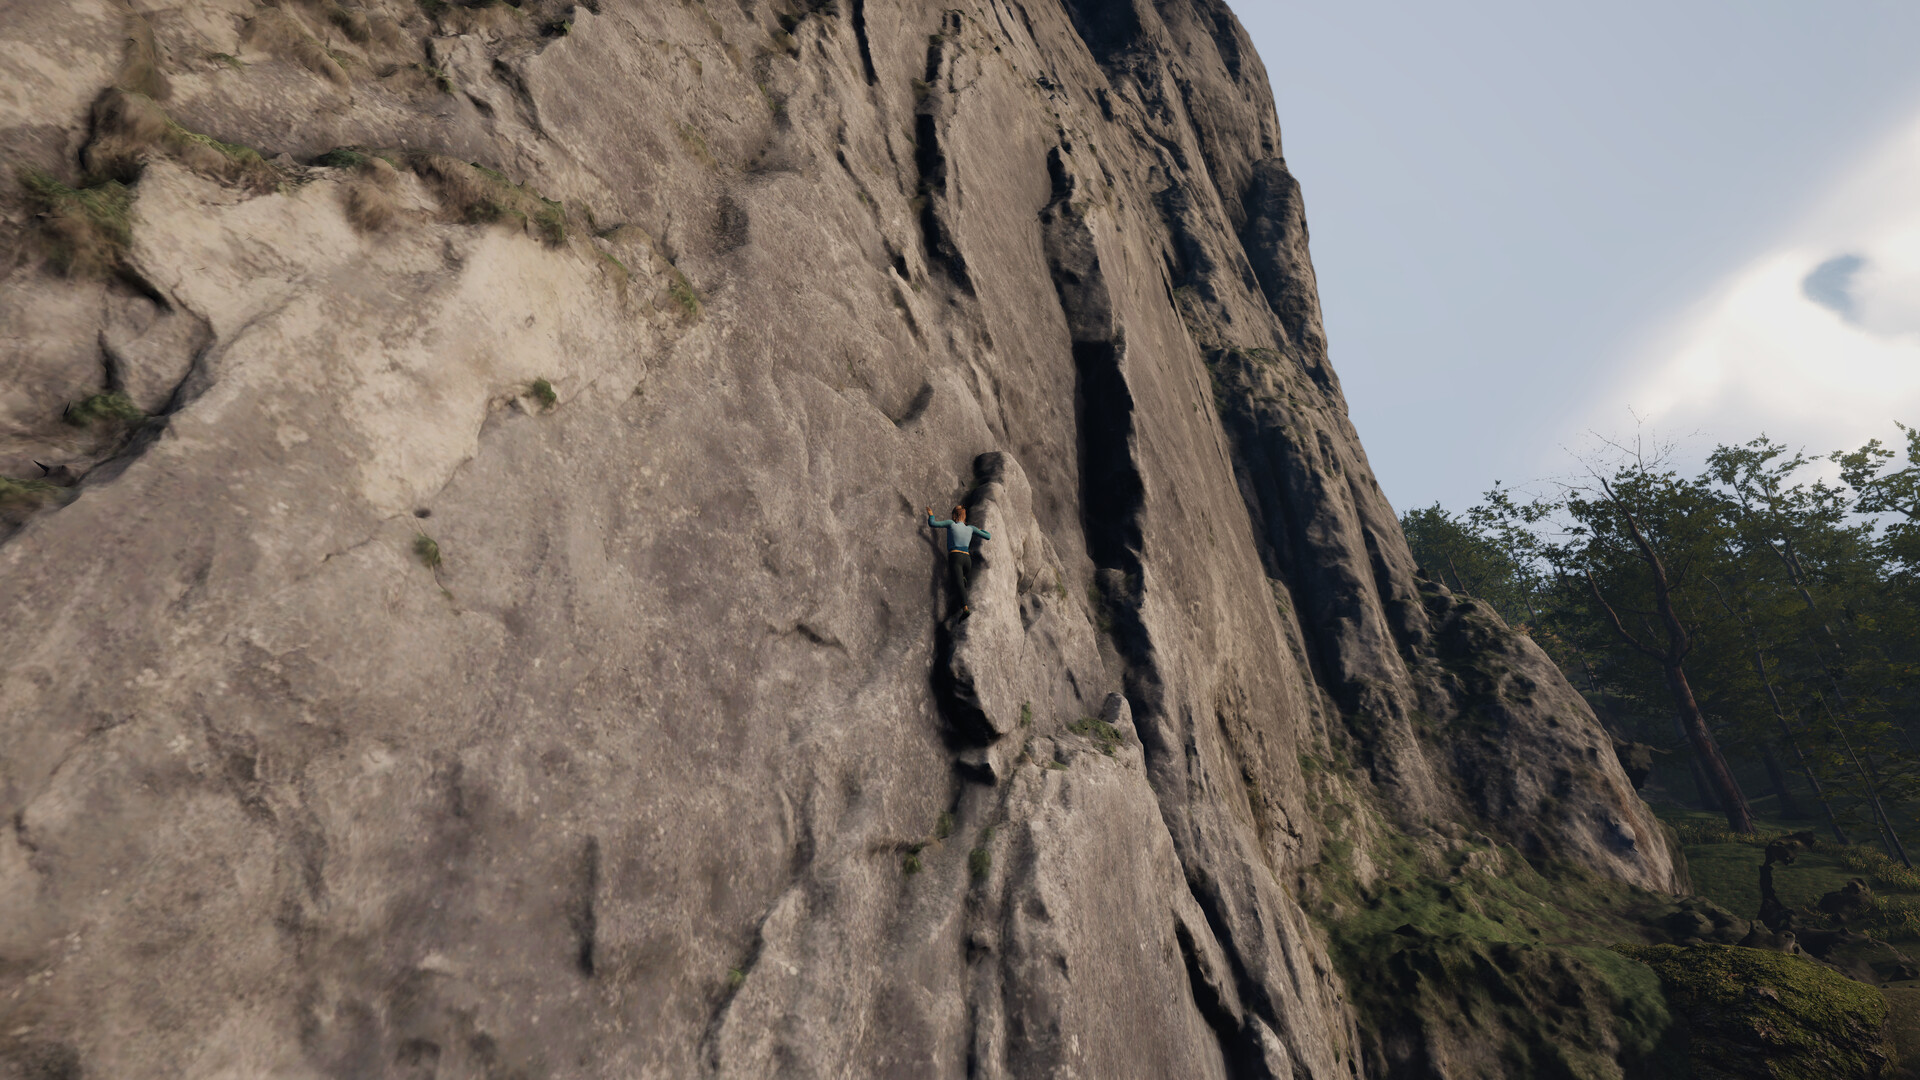 Life is Strange developer's next game will see players climbing to new  heights